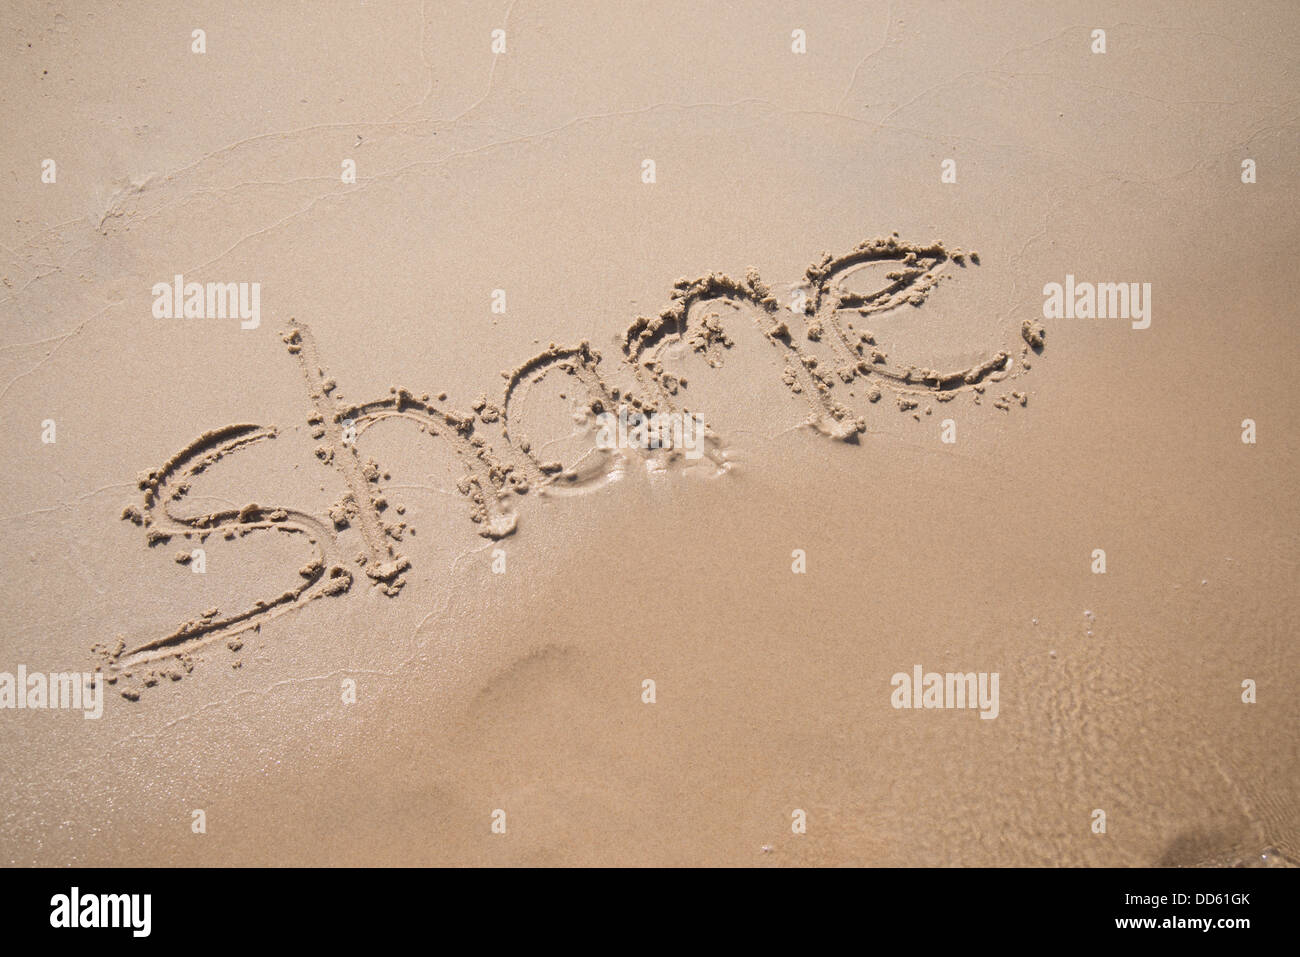 The word "shame" written in the sand, being washed away by a wave. Stock Photo